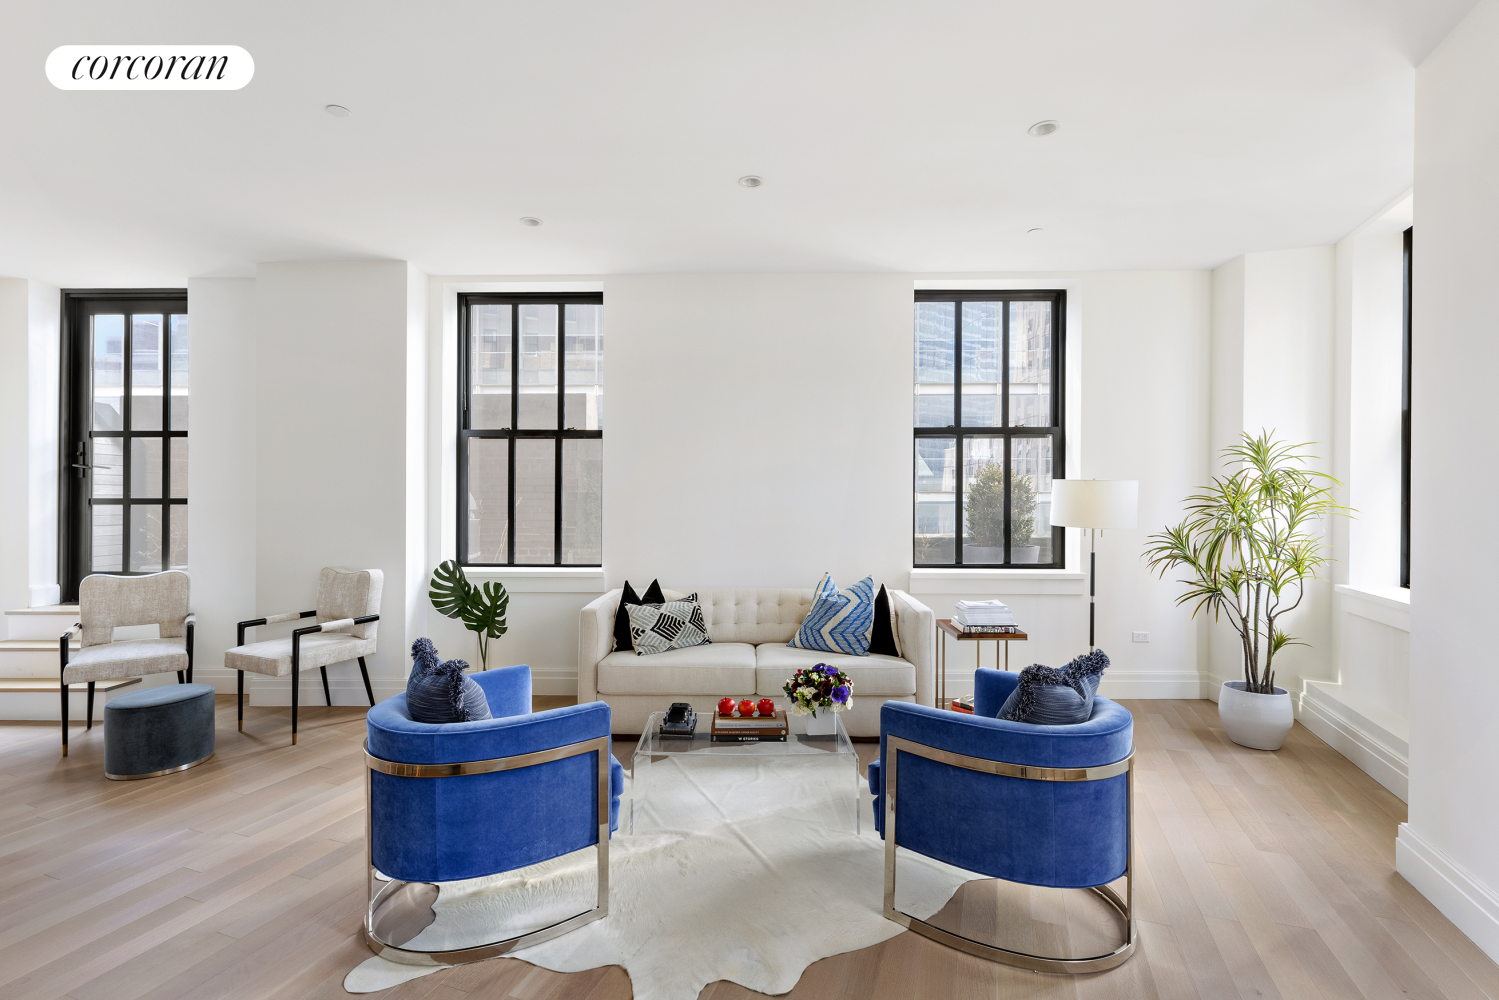 100 Barclay Street 16L, Tribeca, Downtown, NYC - 3 Bedrooms  
3 Bathrooms  
6 Rooms - 